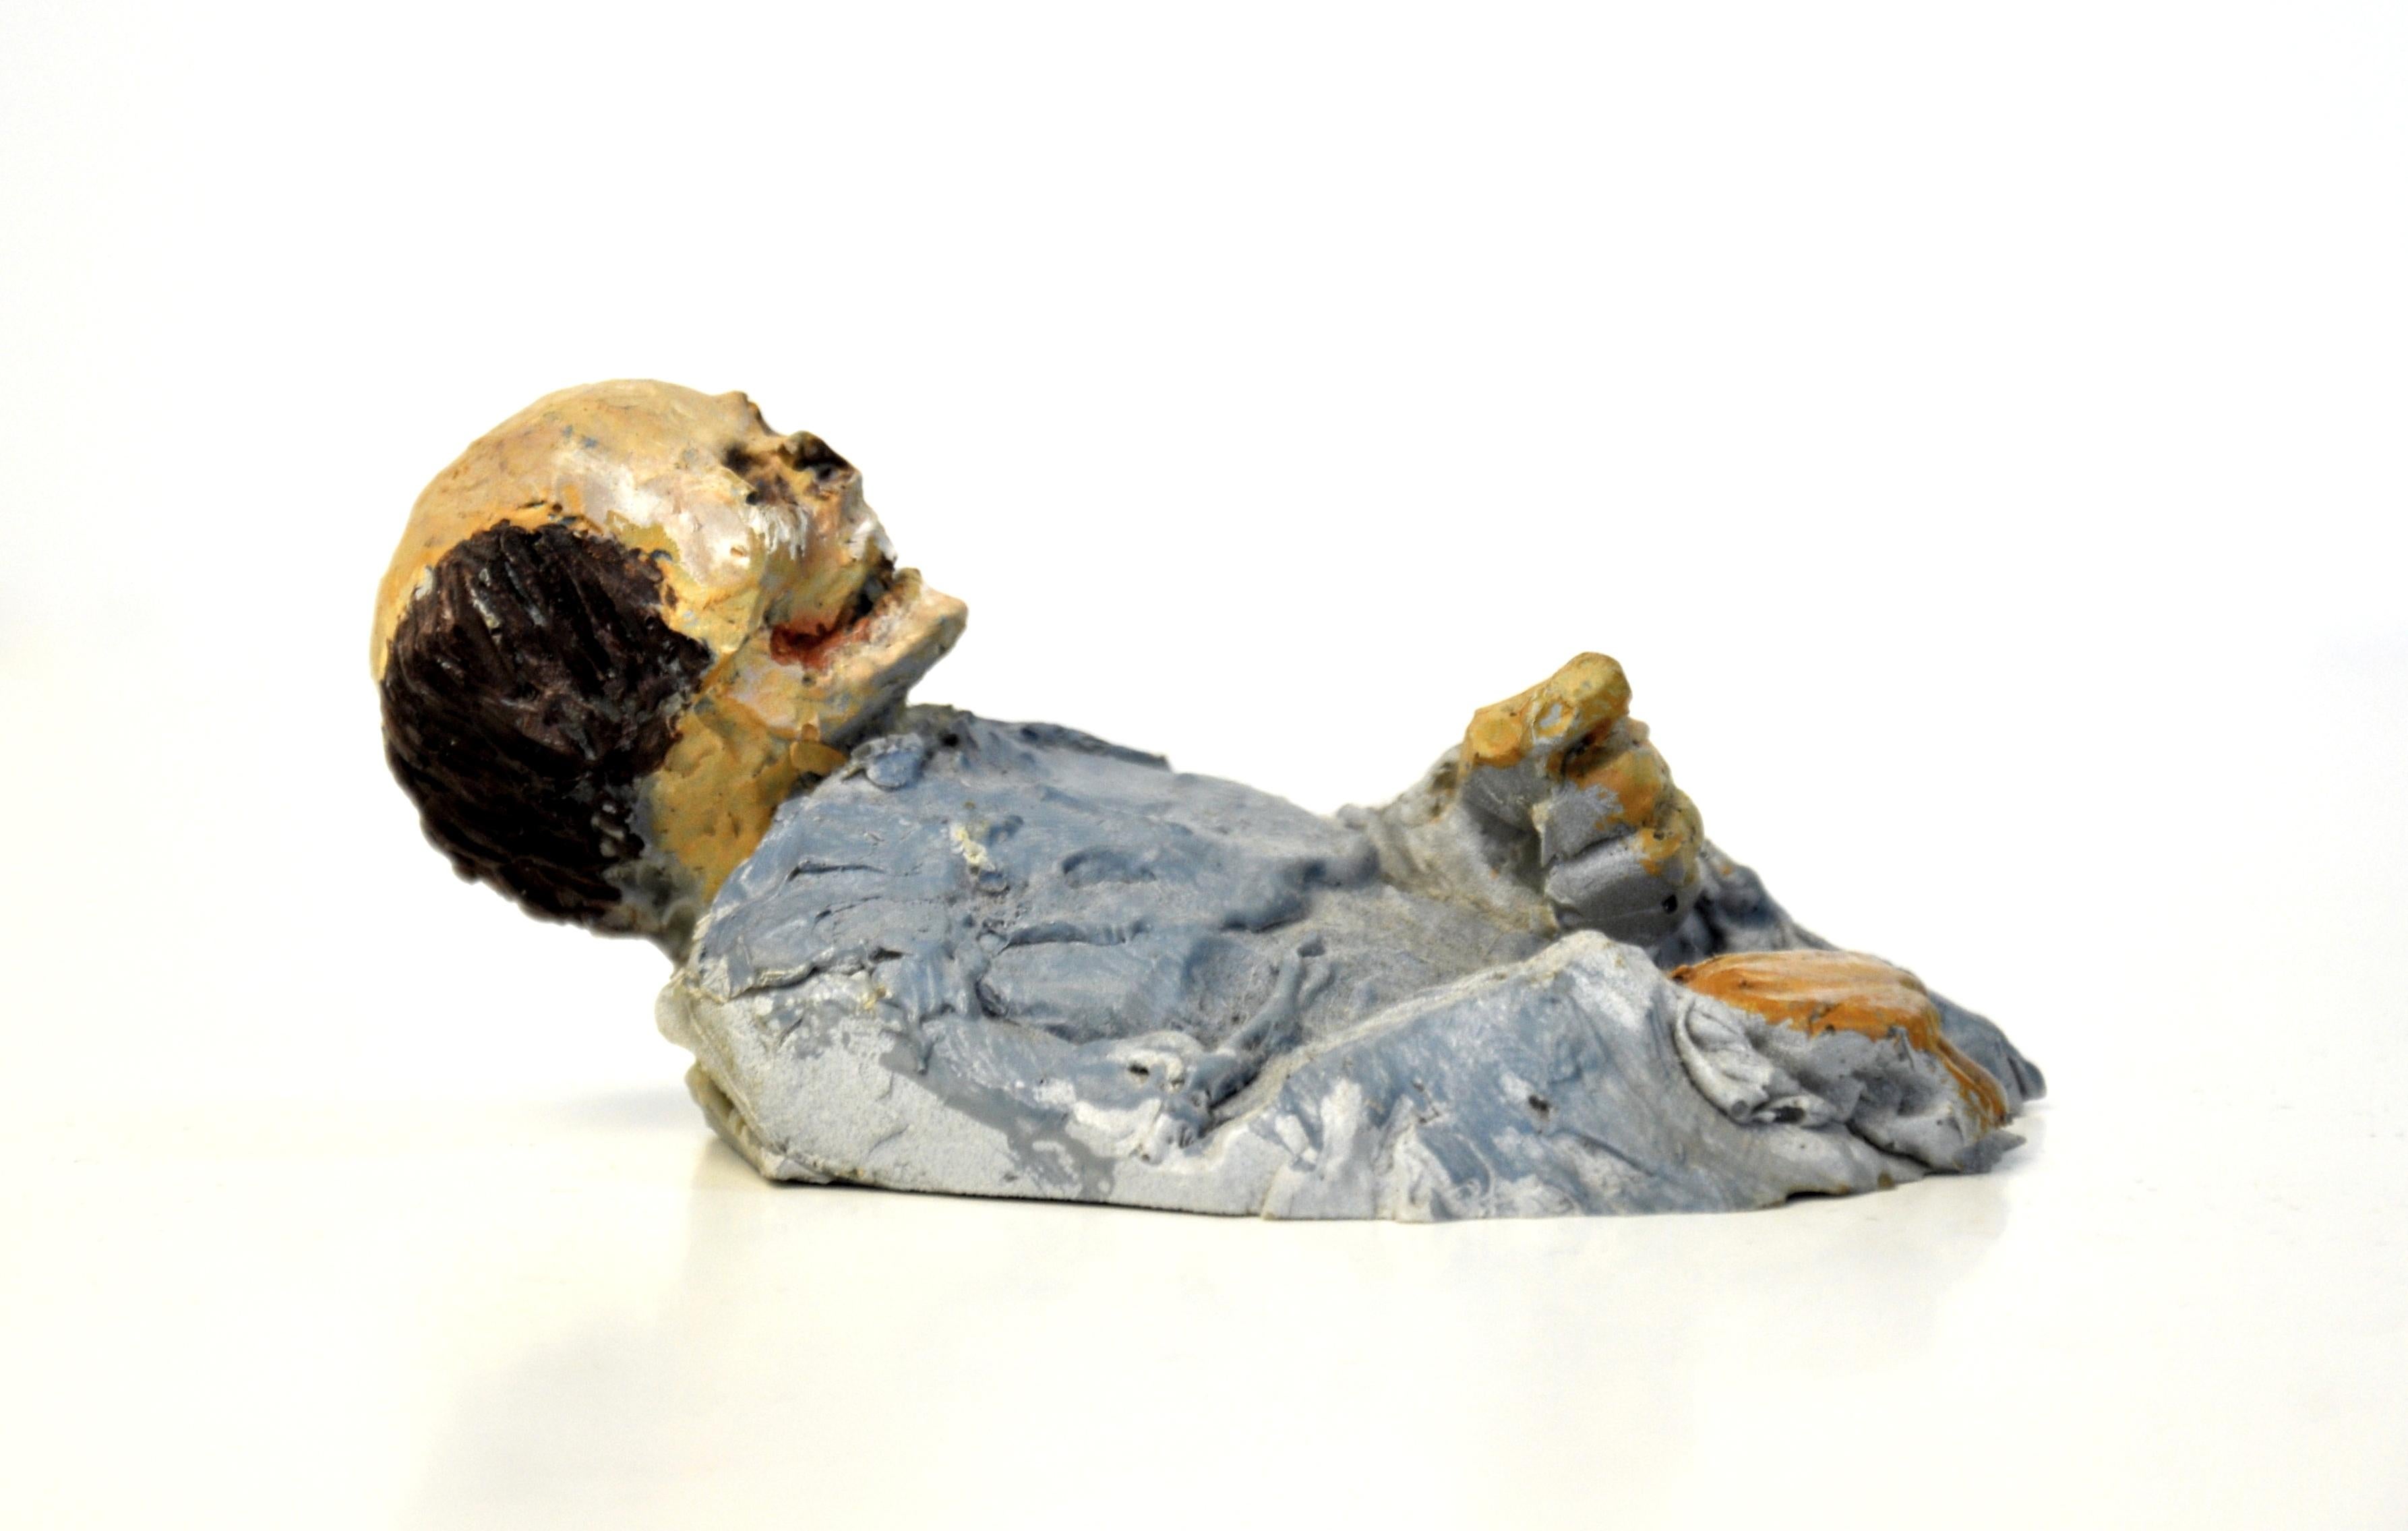 A resin zombie skeleton figure sculpture by Isaac Cordal, a contemporary Brussels-based Spanish sculptor, from the Urban Inertia exhibition, titled Viva la Muerte. The bust appears to protrude from whatever surface it is placed on, much like a